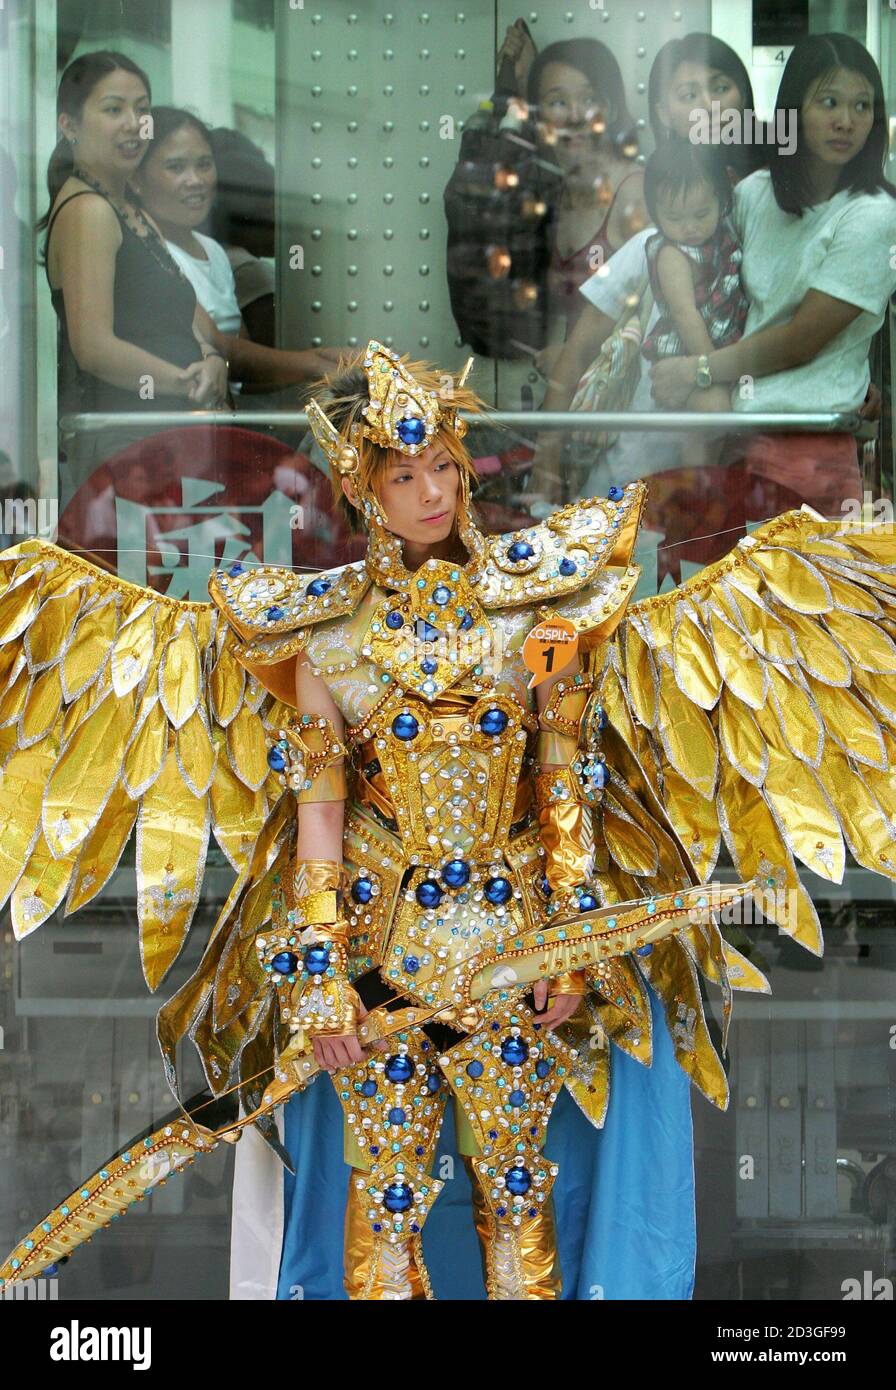 A cosplayer dressed as a character from the Japanese cartoon "Saint Seiya"  stands in front of onlookers during a cosplay contest at a shopping mall in  Hong Kong July 19, 2005. The